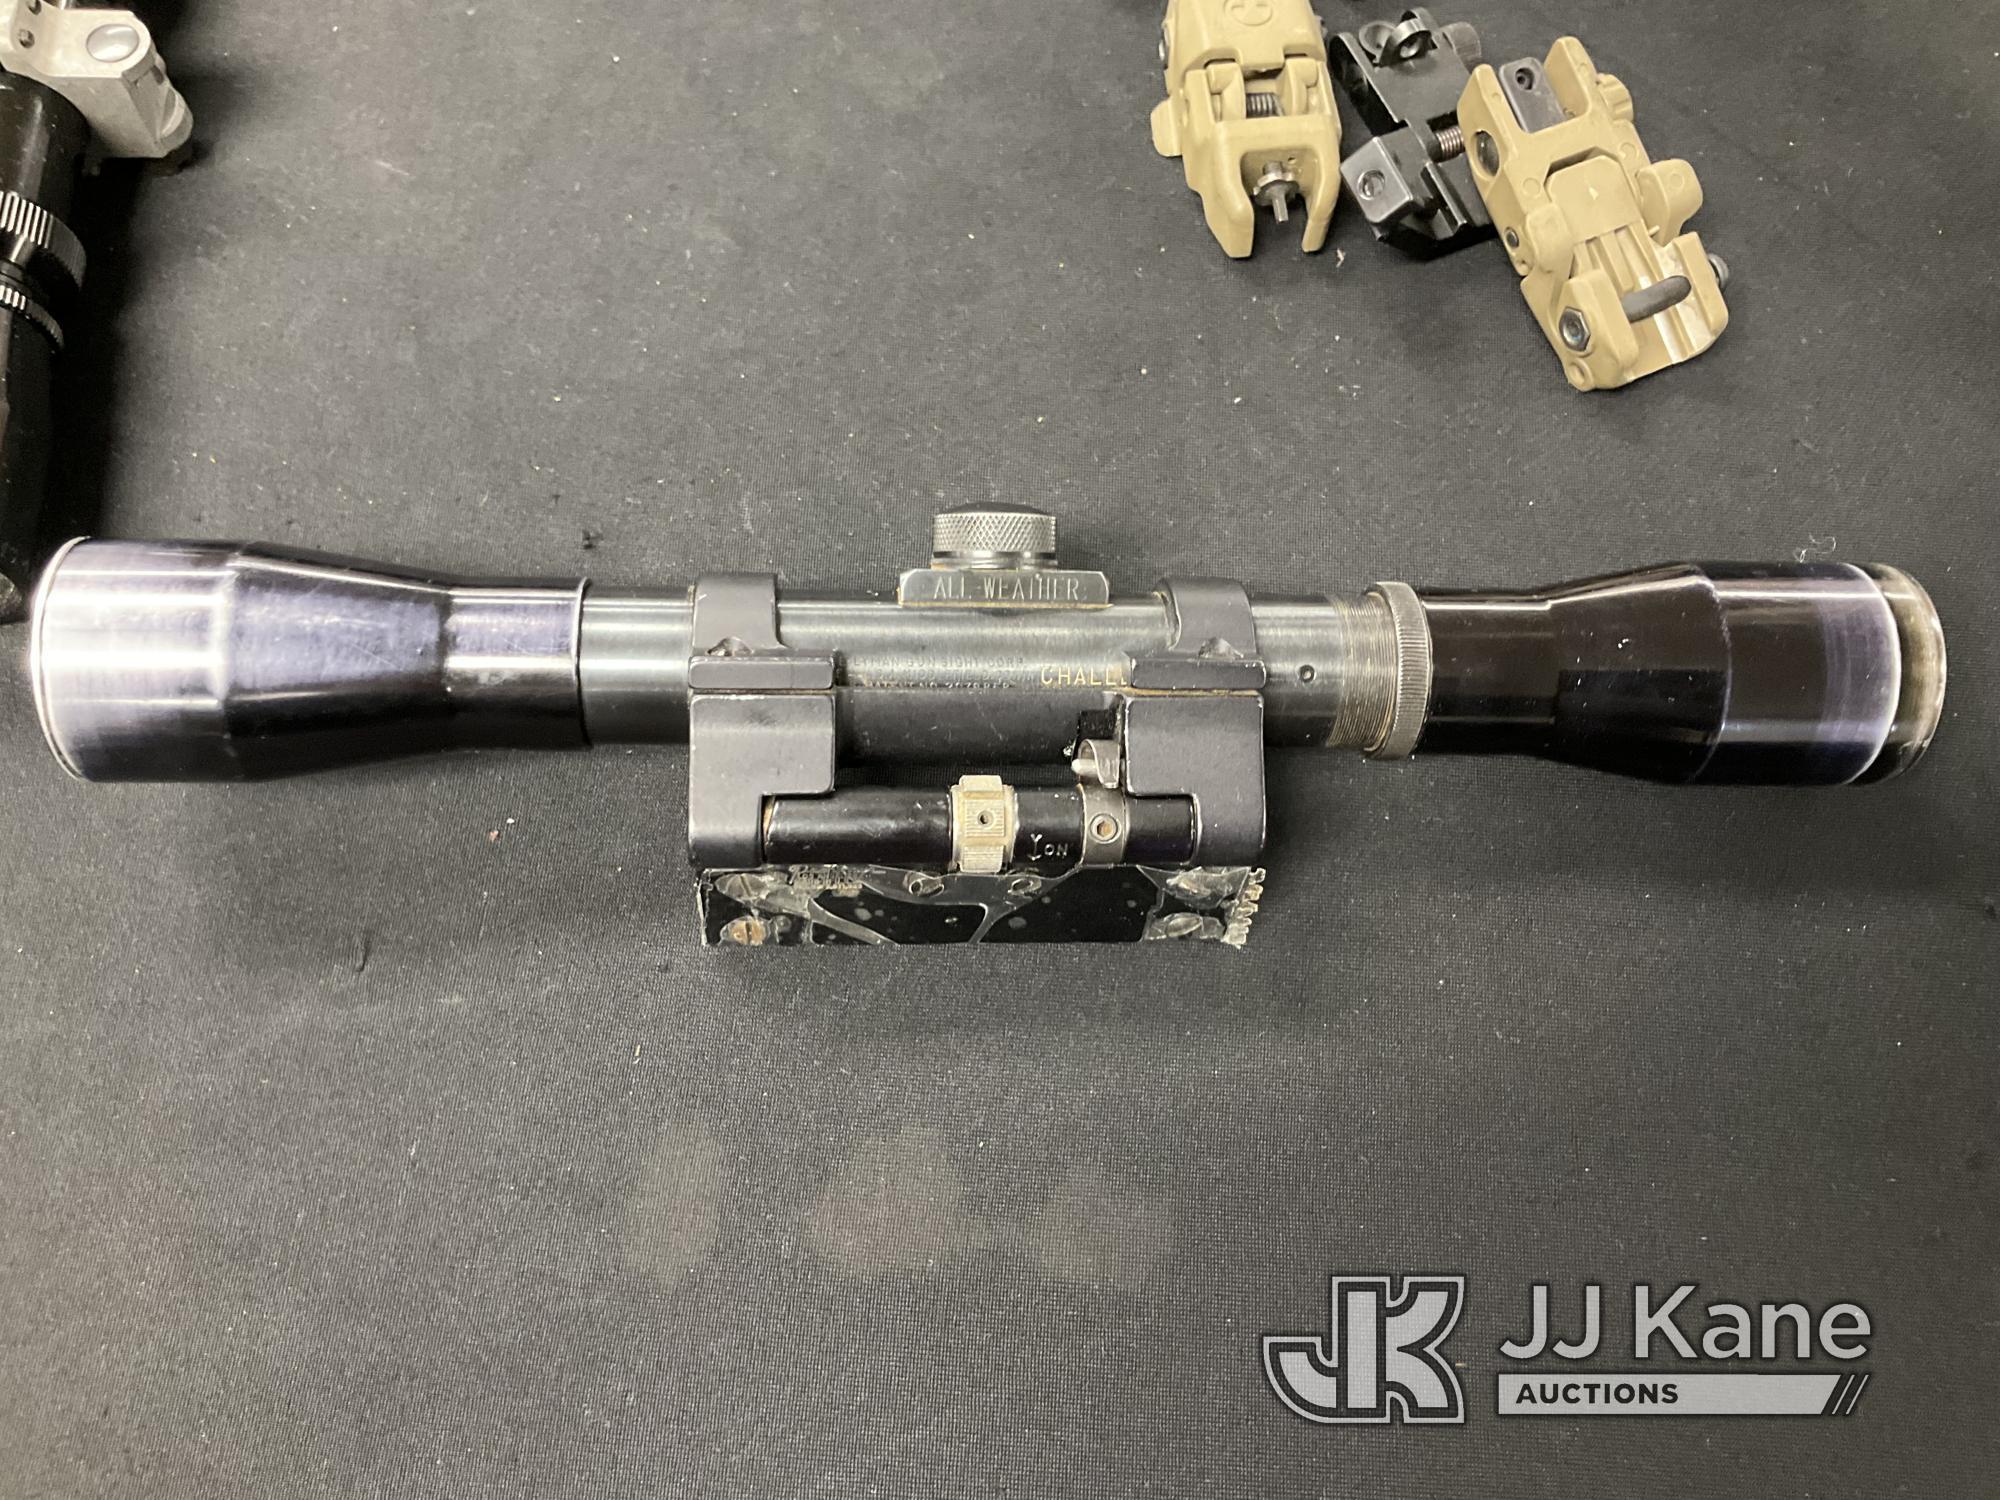 (Jurupa Valley, CA) Gun Scopes / Attachments (Used) NOTE: This unit is being sold AS IS/WHERE IS via